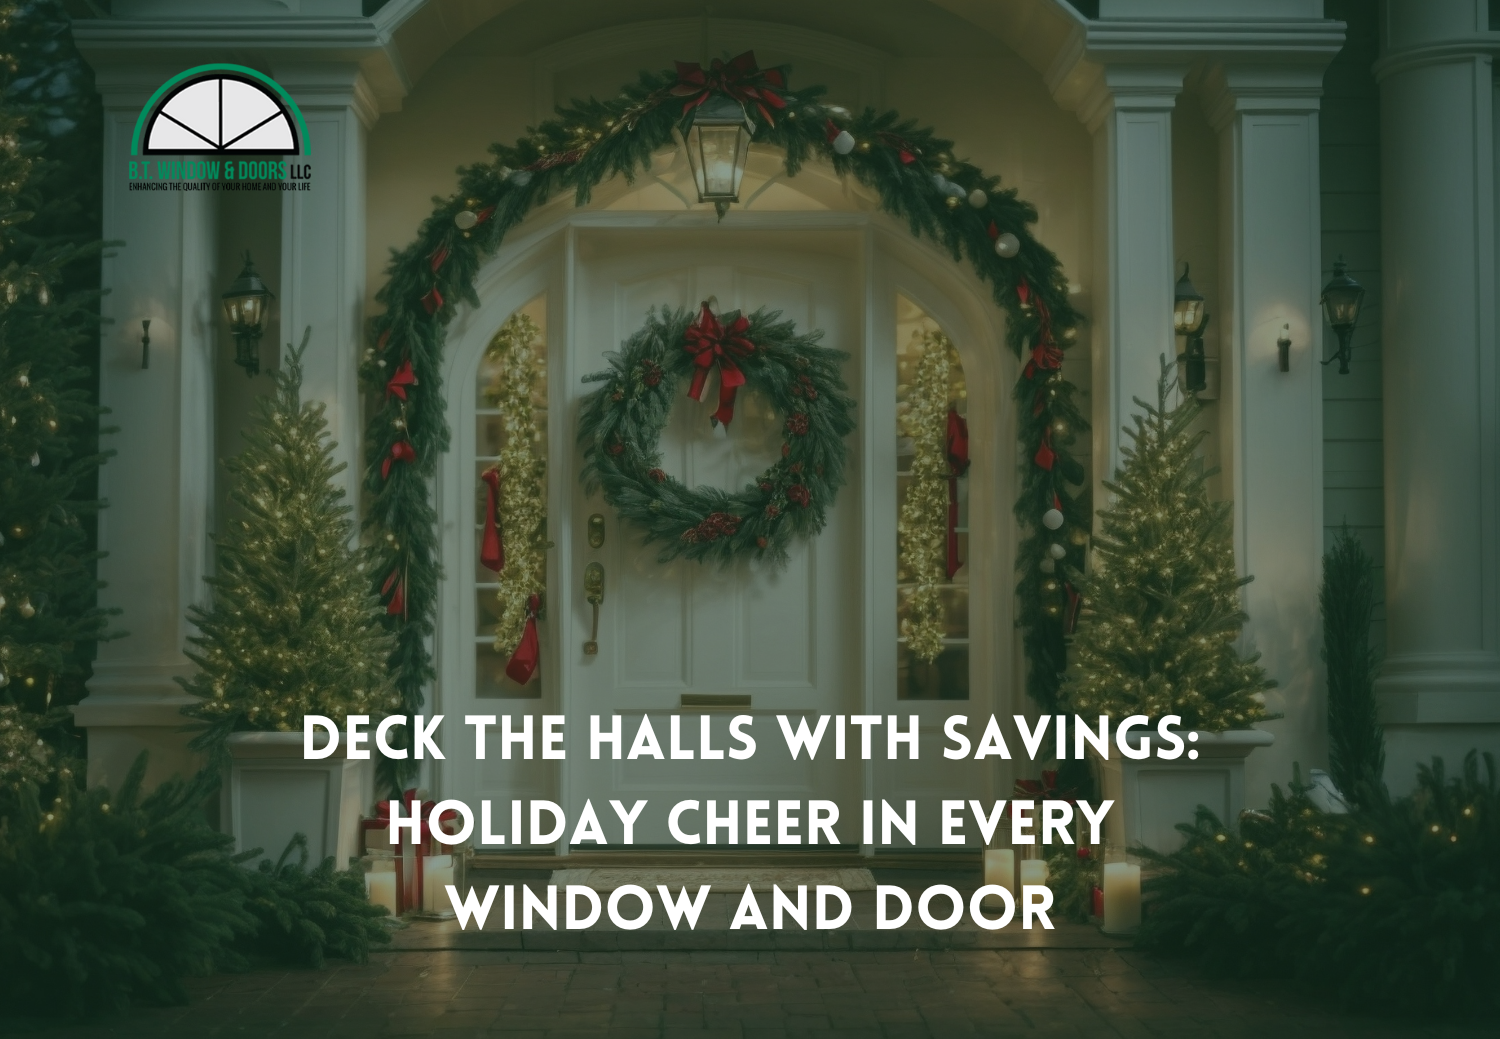 Deck the Halls with Savings: Holiday Cheer in Every Window and Door